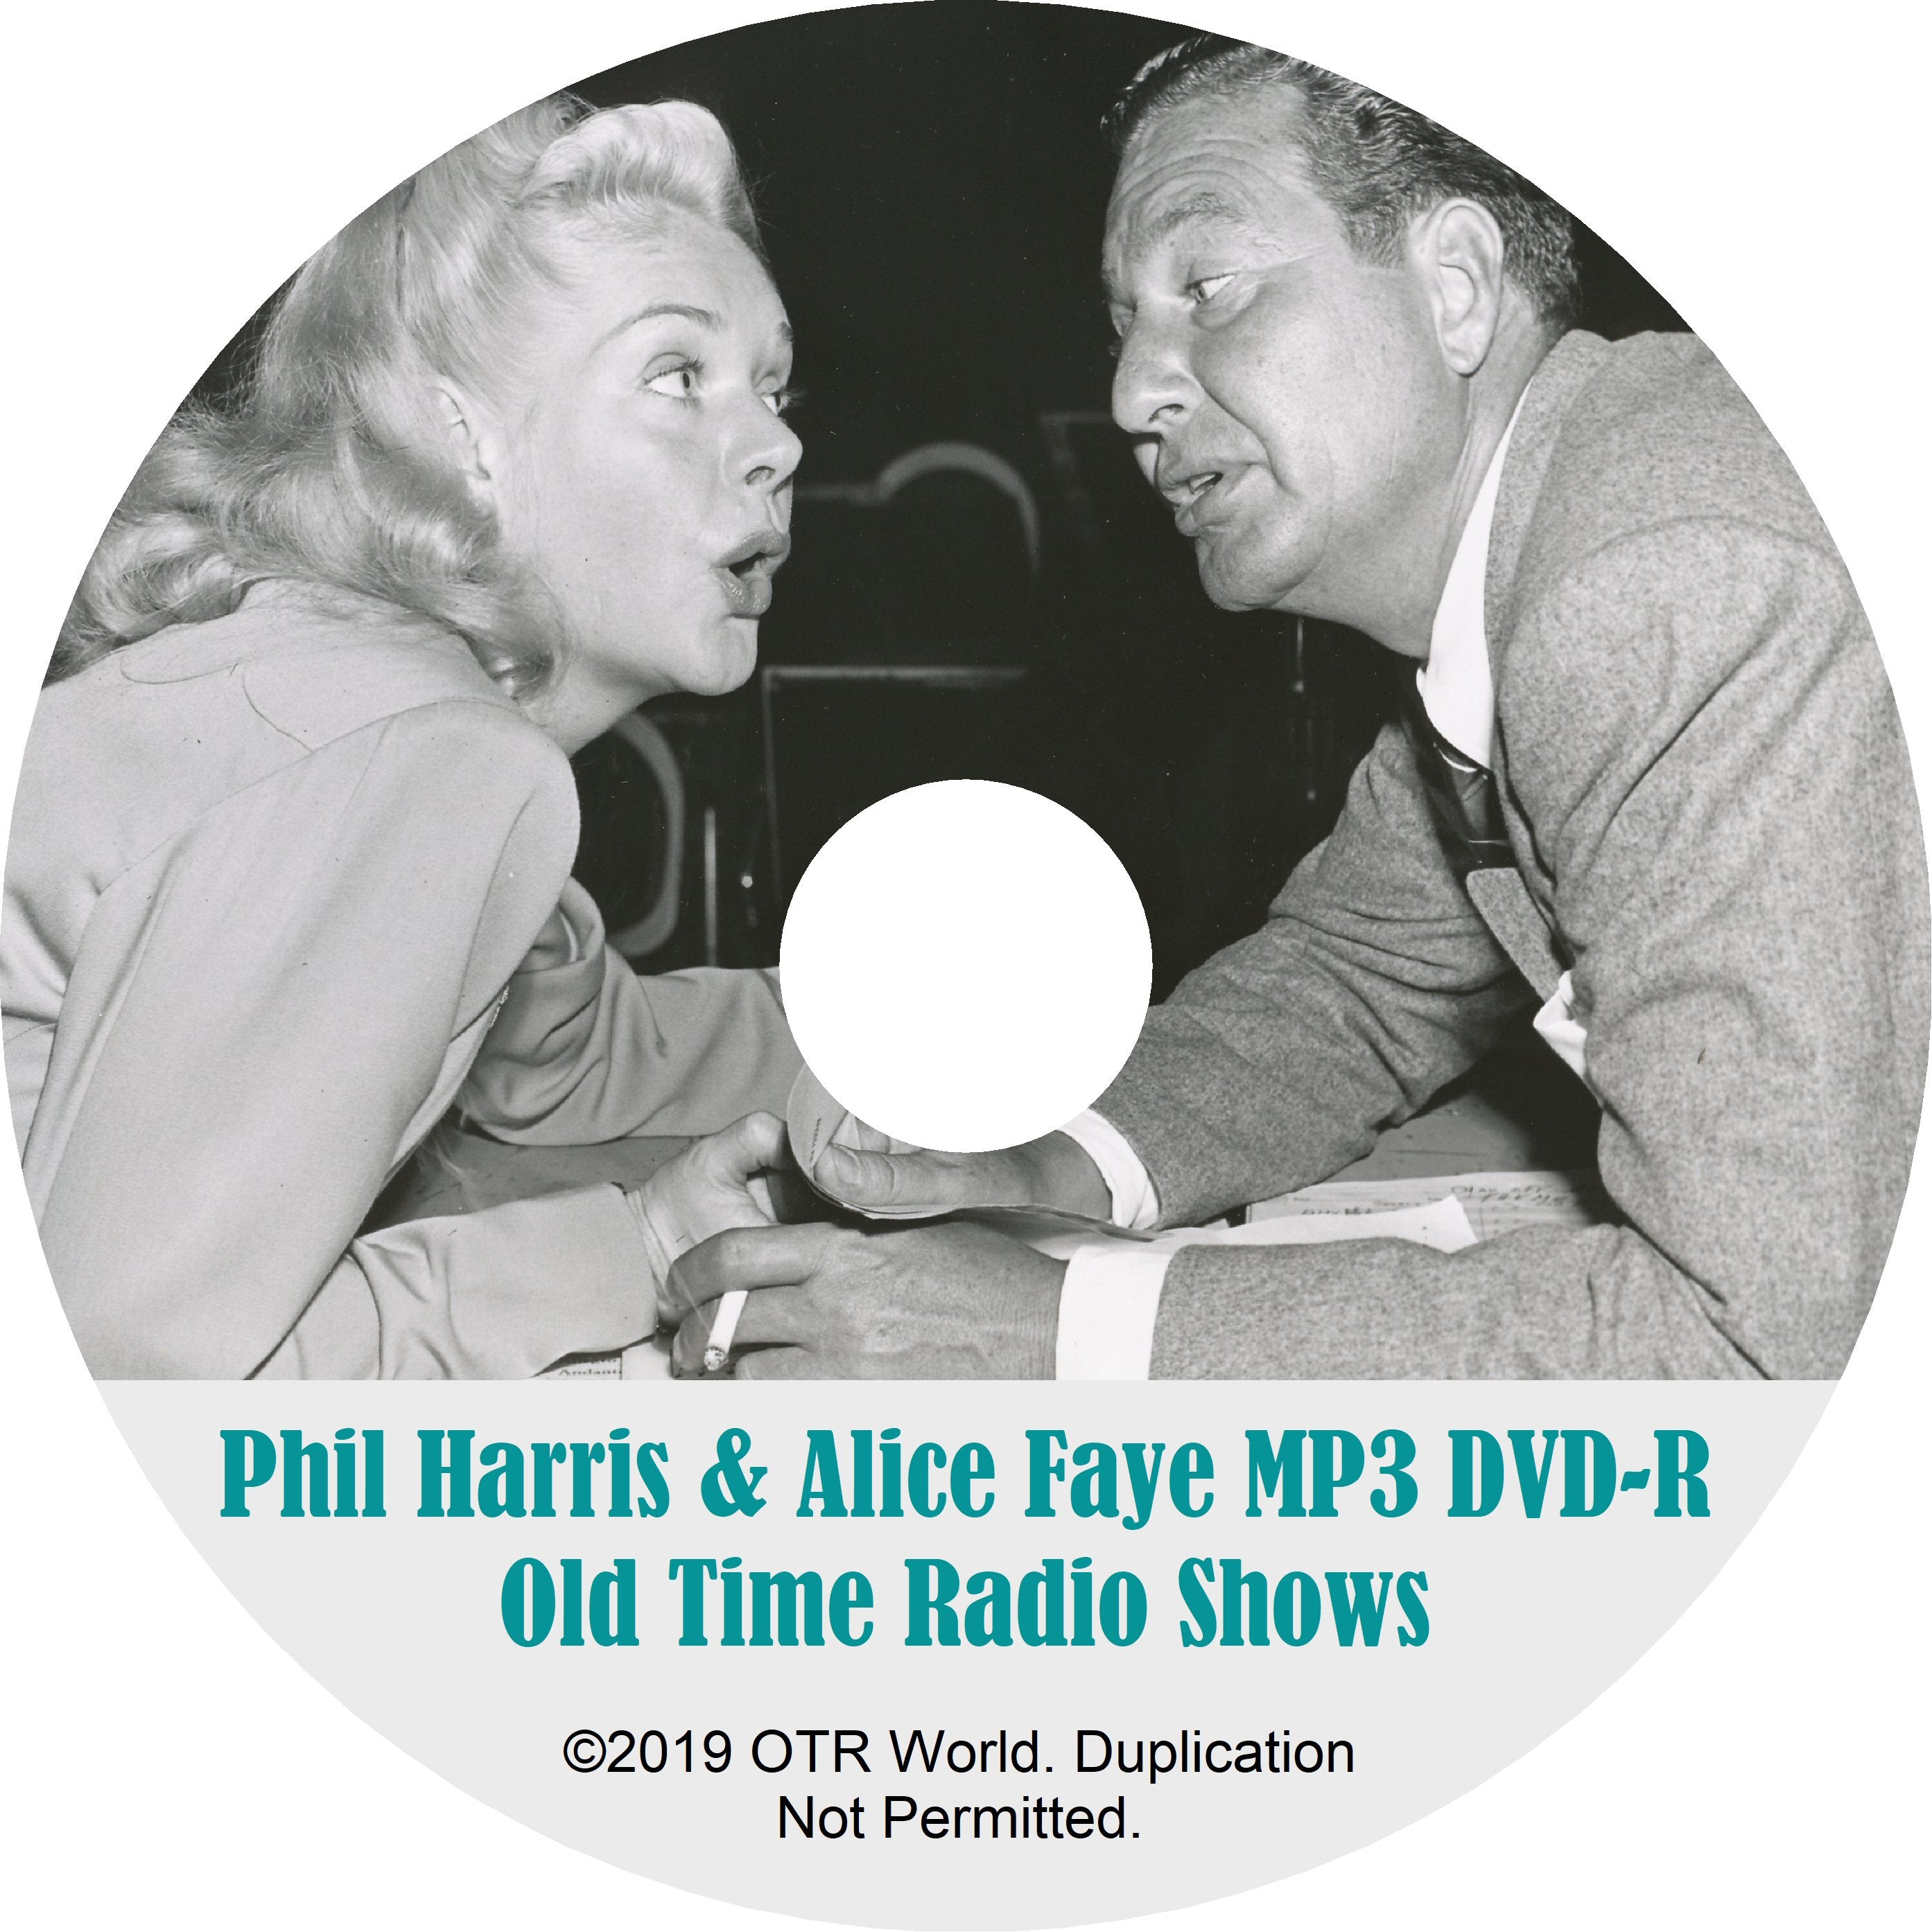 Phil Harris & Alice Faye Show Old Time Radio Show MP3 DVD-R 173 Episodes